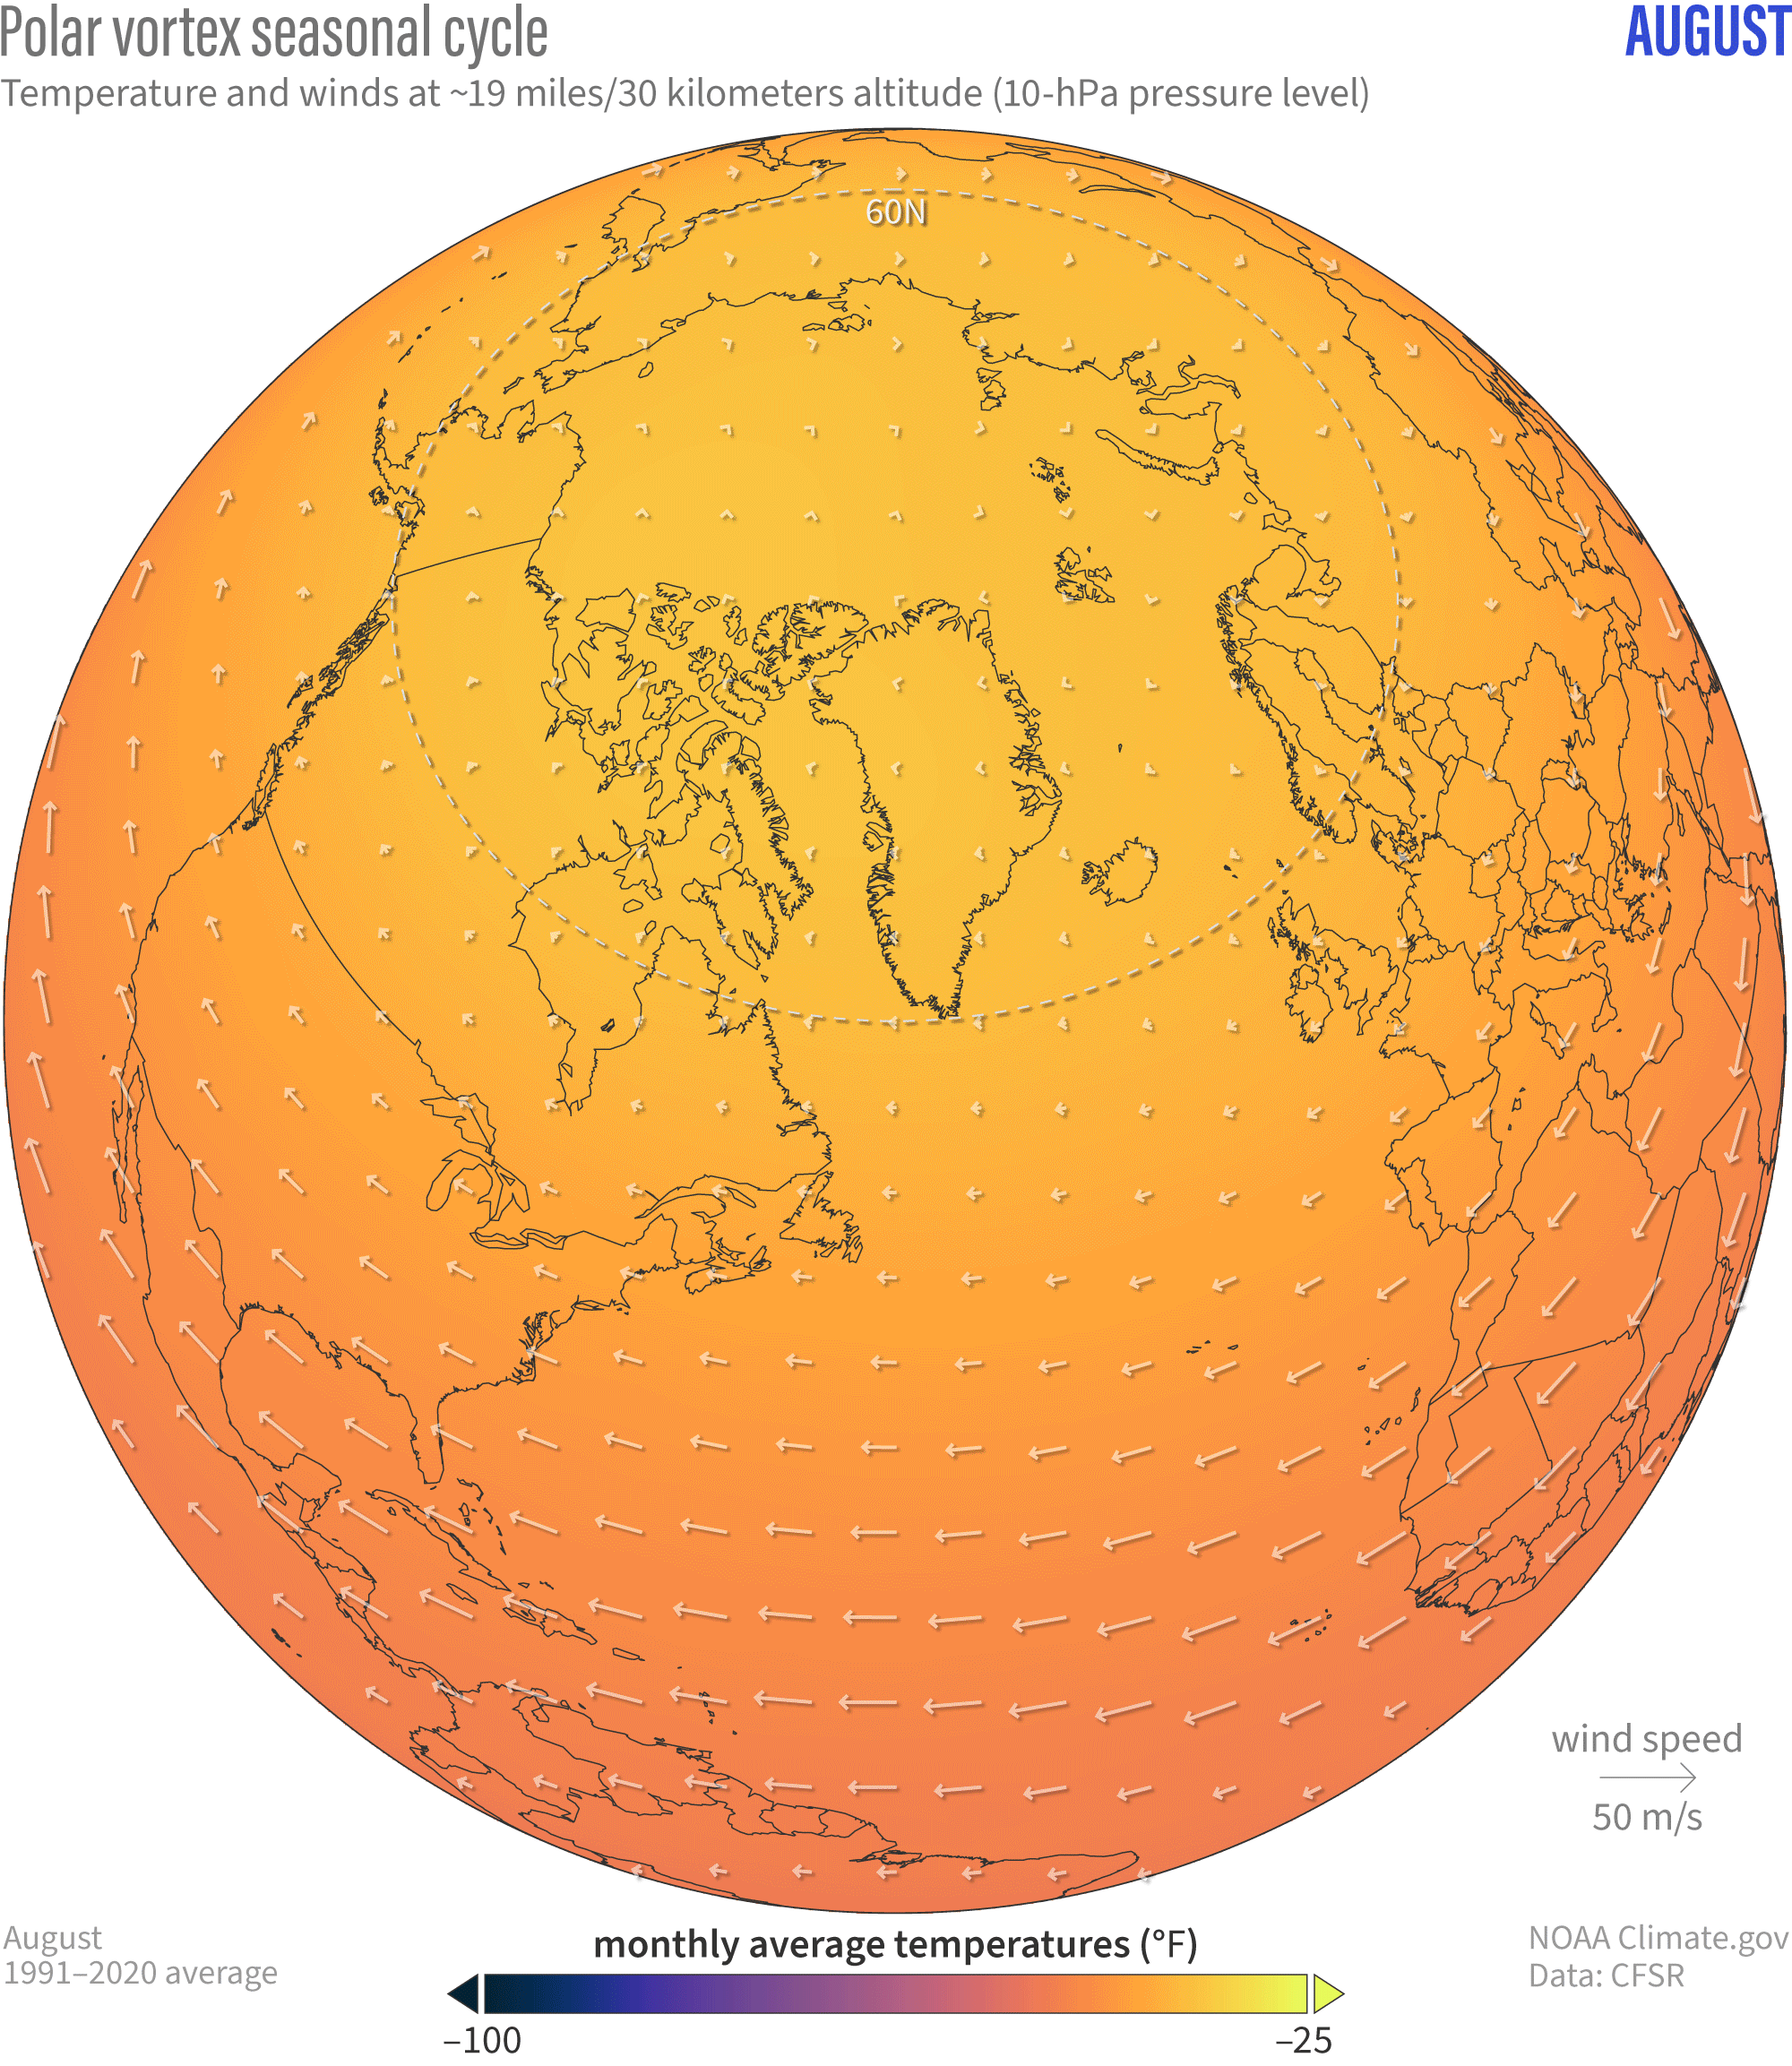 animation of globe-style maps of temperature and wind direction